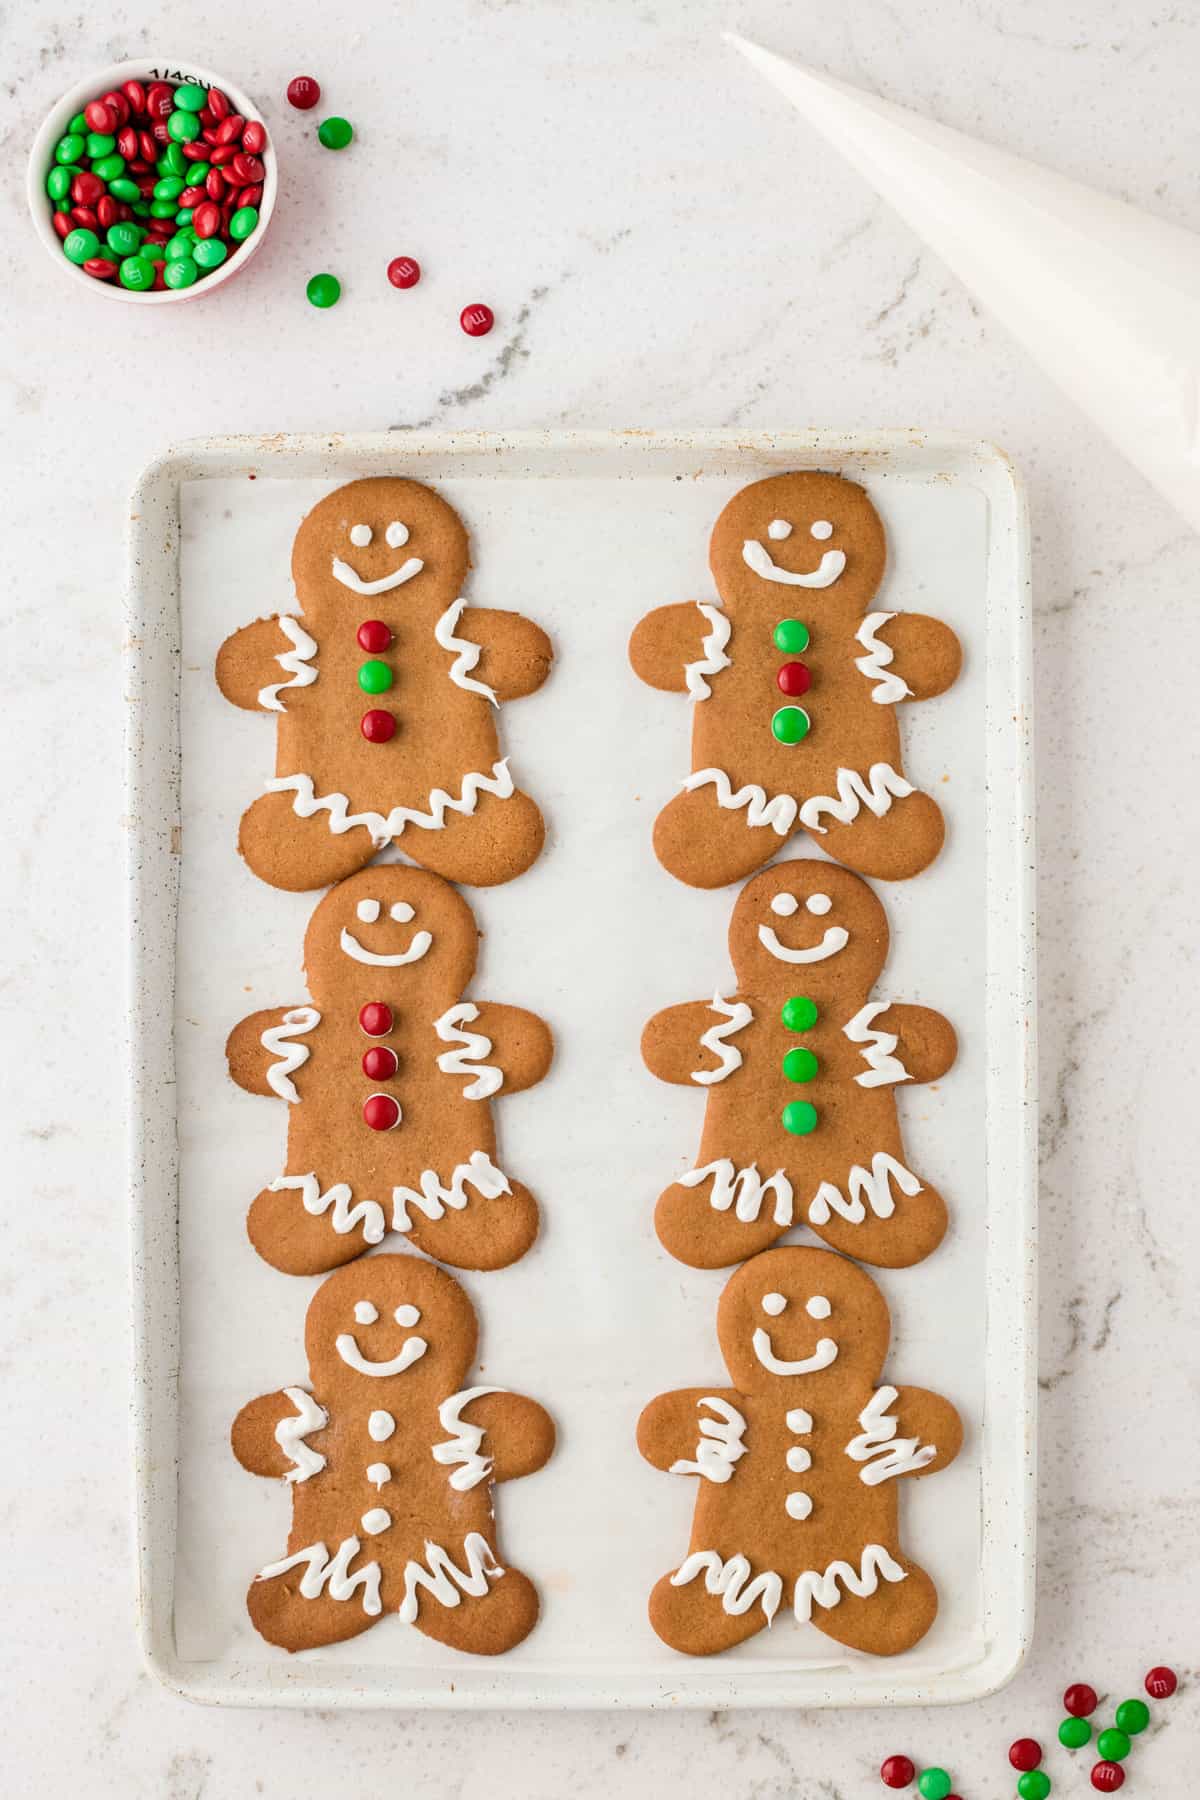 Place the frosting mixture into a piping bag and decorate the gingerbread cookies how you like .